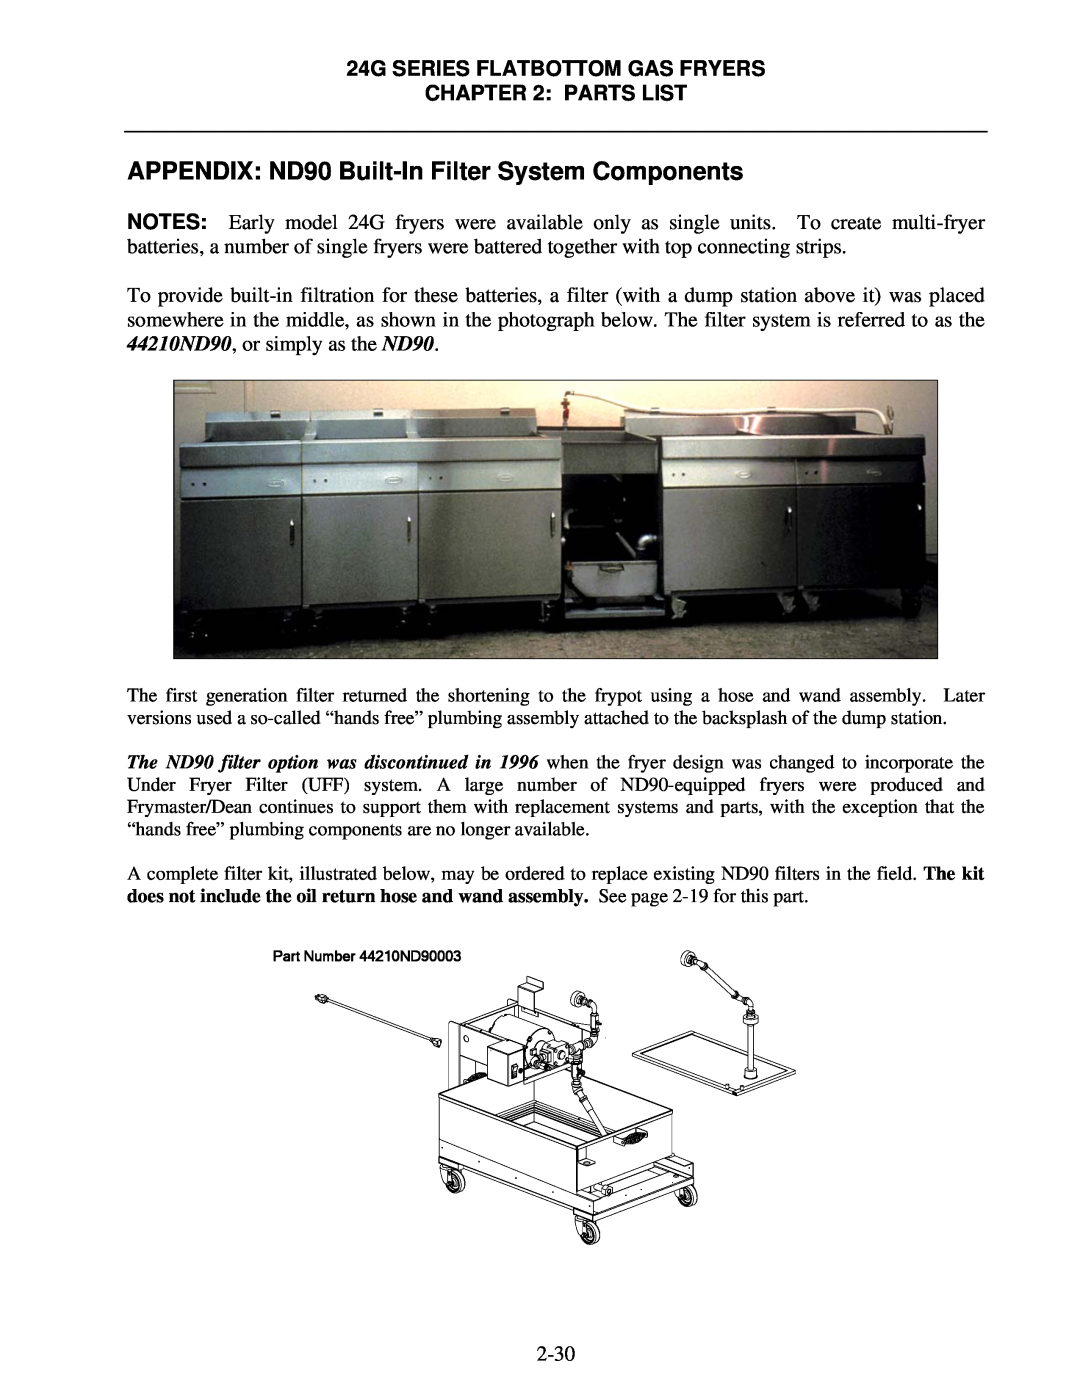 Frymaster 1824/2424G APPENDIX ND90 Built-In Filter System Components, 2-30, 24G SERIES FLATBOTTOM GAS FRYERS PARTS LIST 